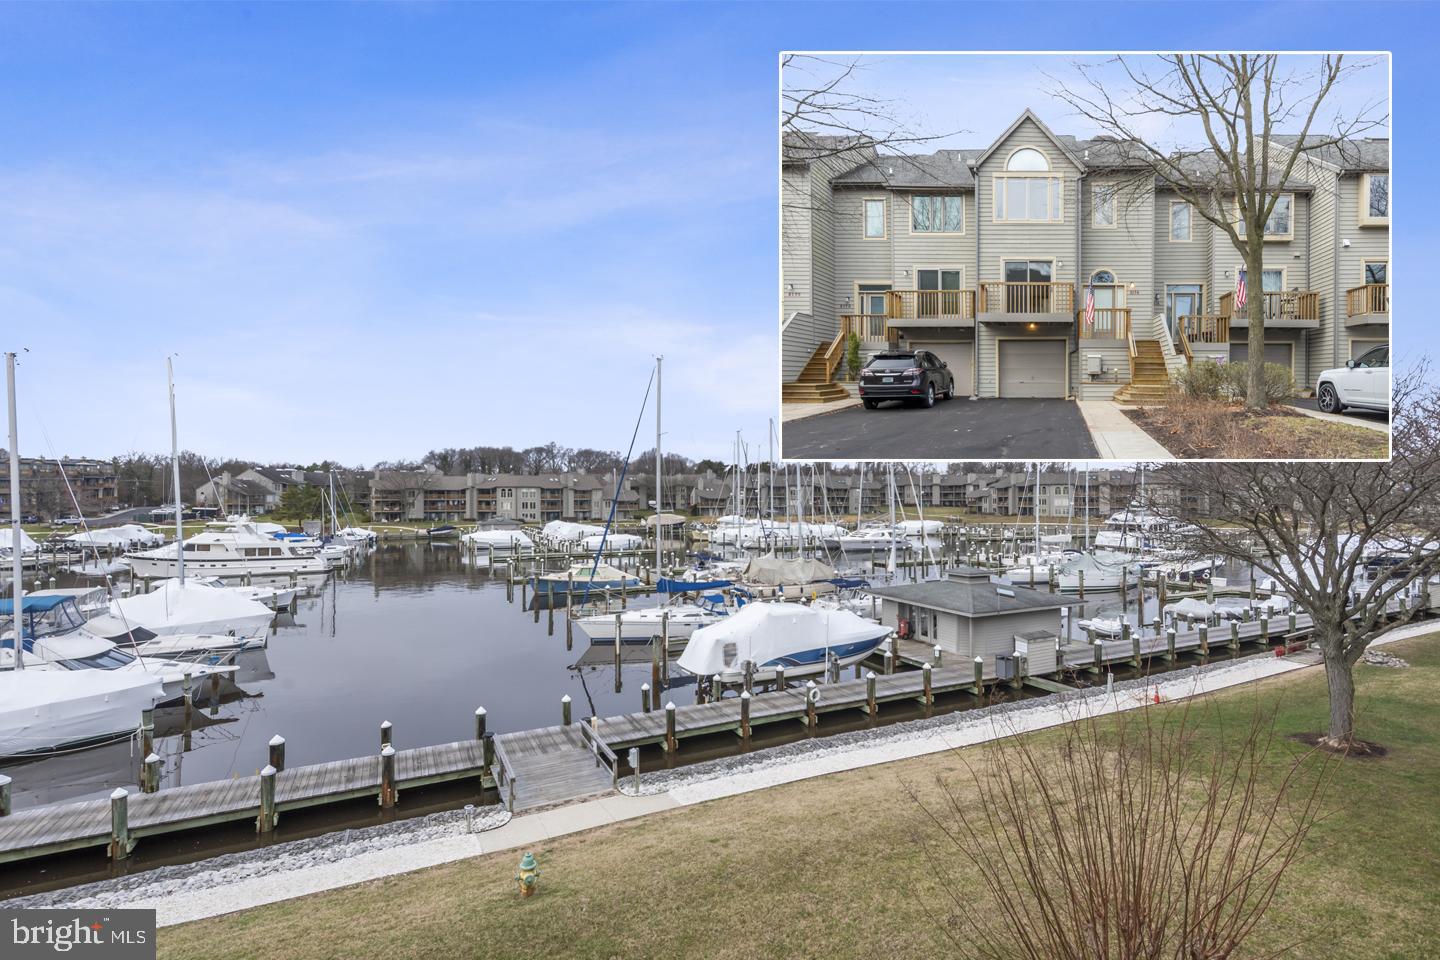 View Annapolis, MD 21403 townhome